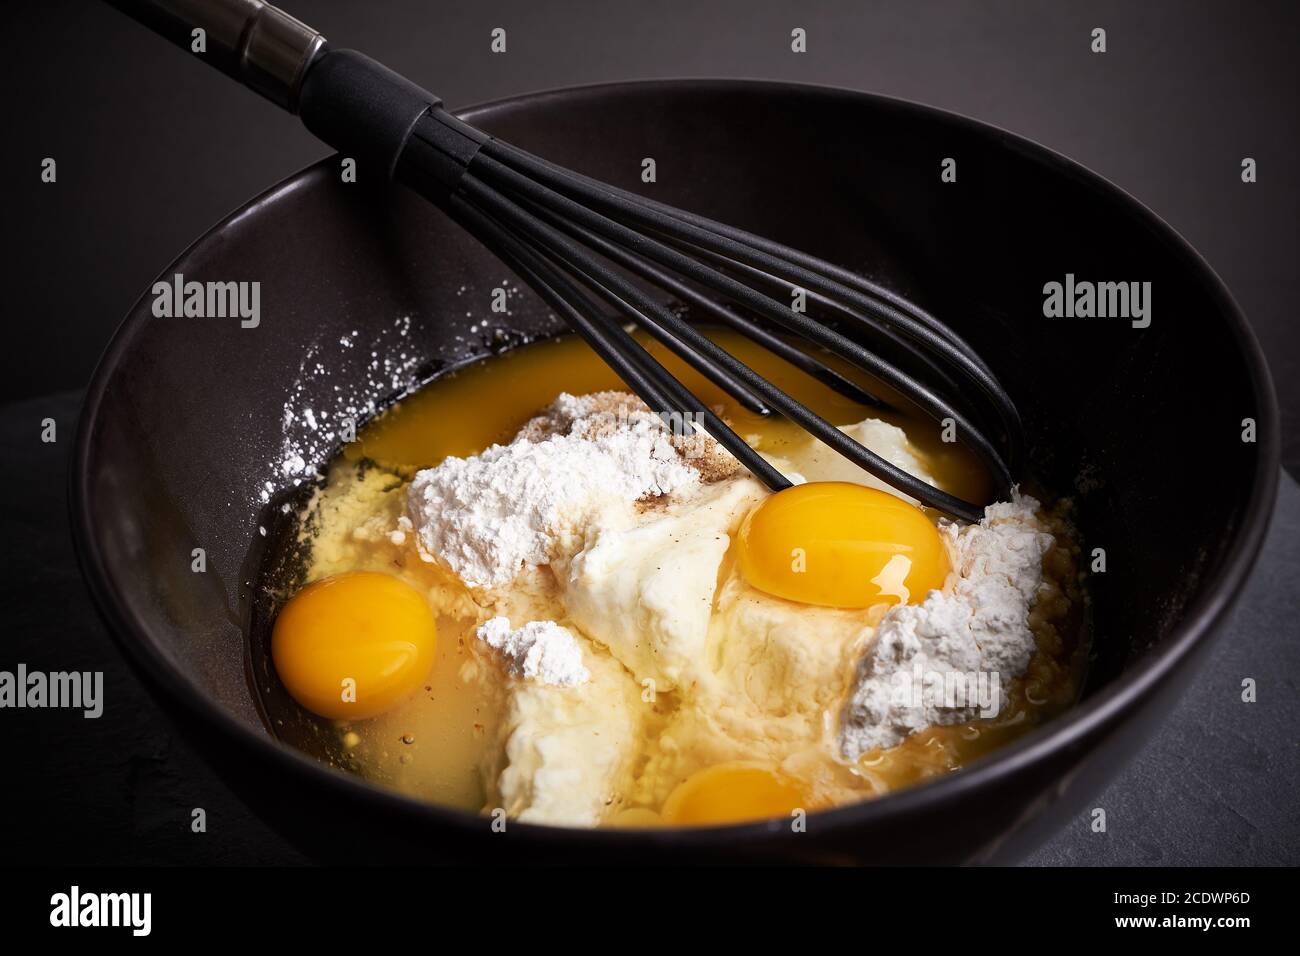 Mixing Bowl and Whisk with Eggs, Flour and Sugar Stock Photo